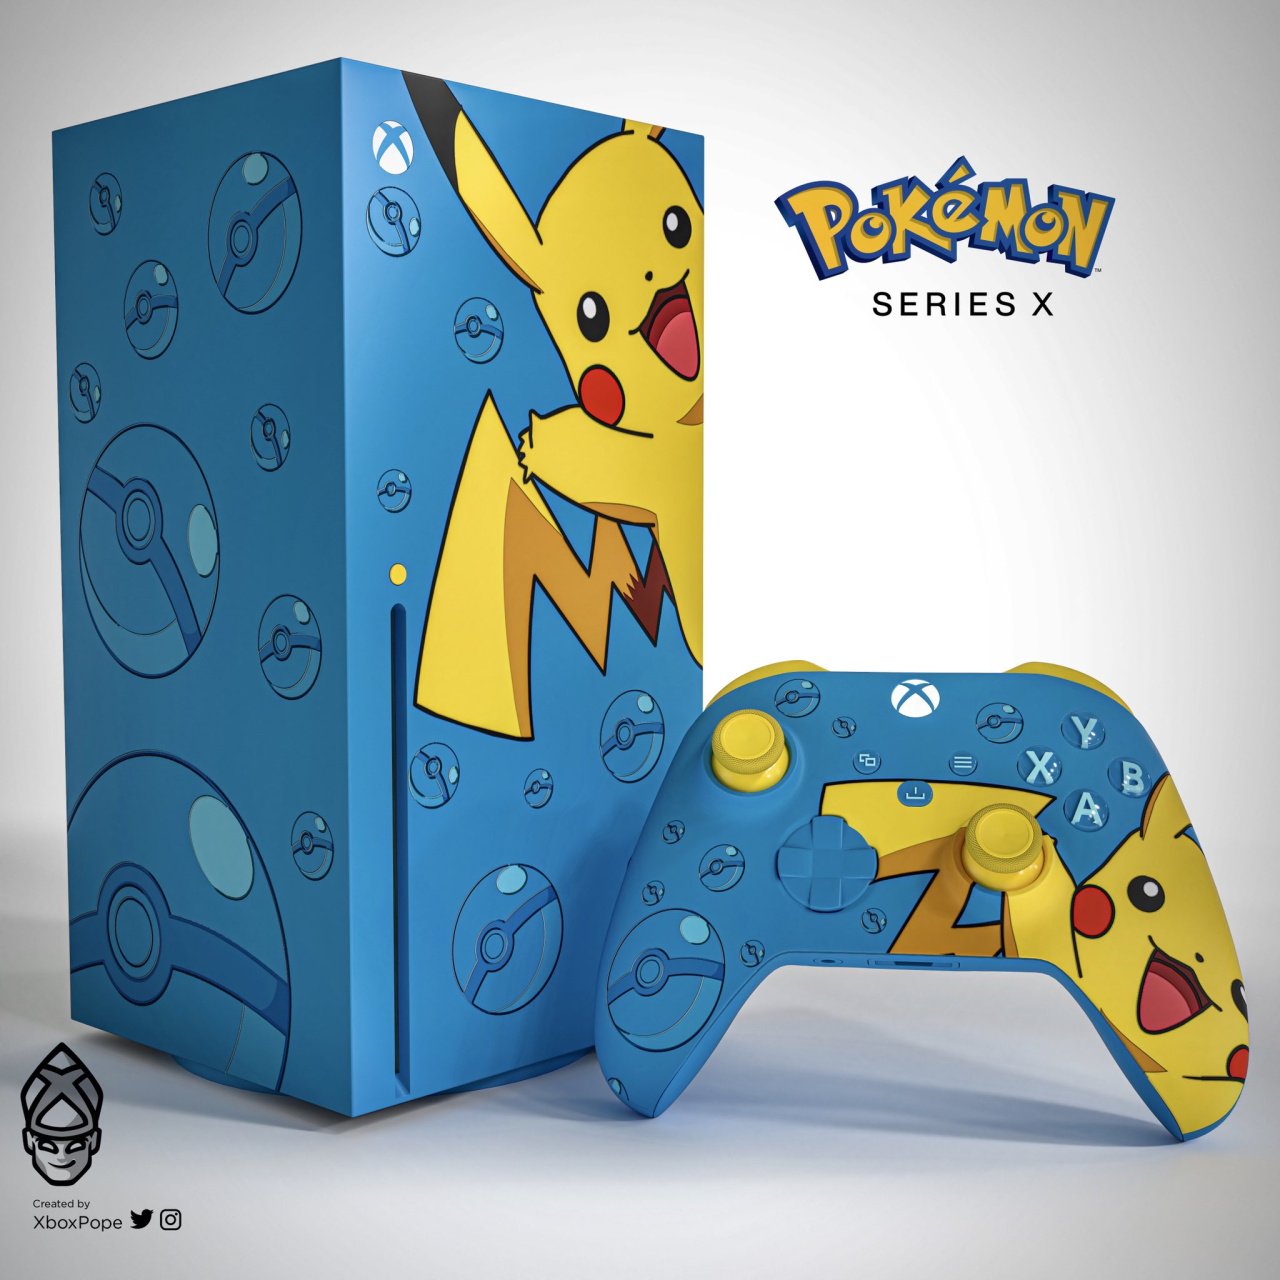 Boos staart Berucht Random: Check Out This Incredible Pokémon Xbox Series X Concept | Pure Xbox